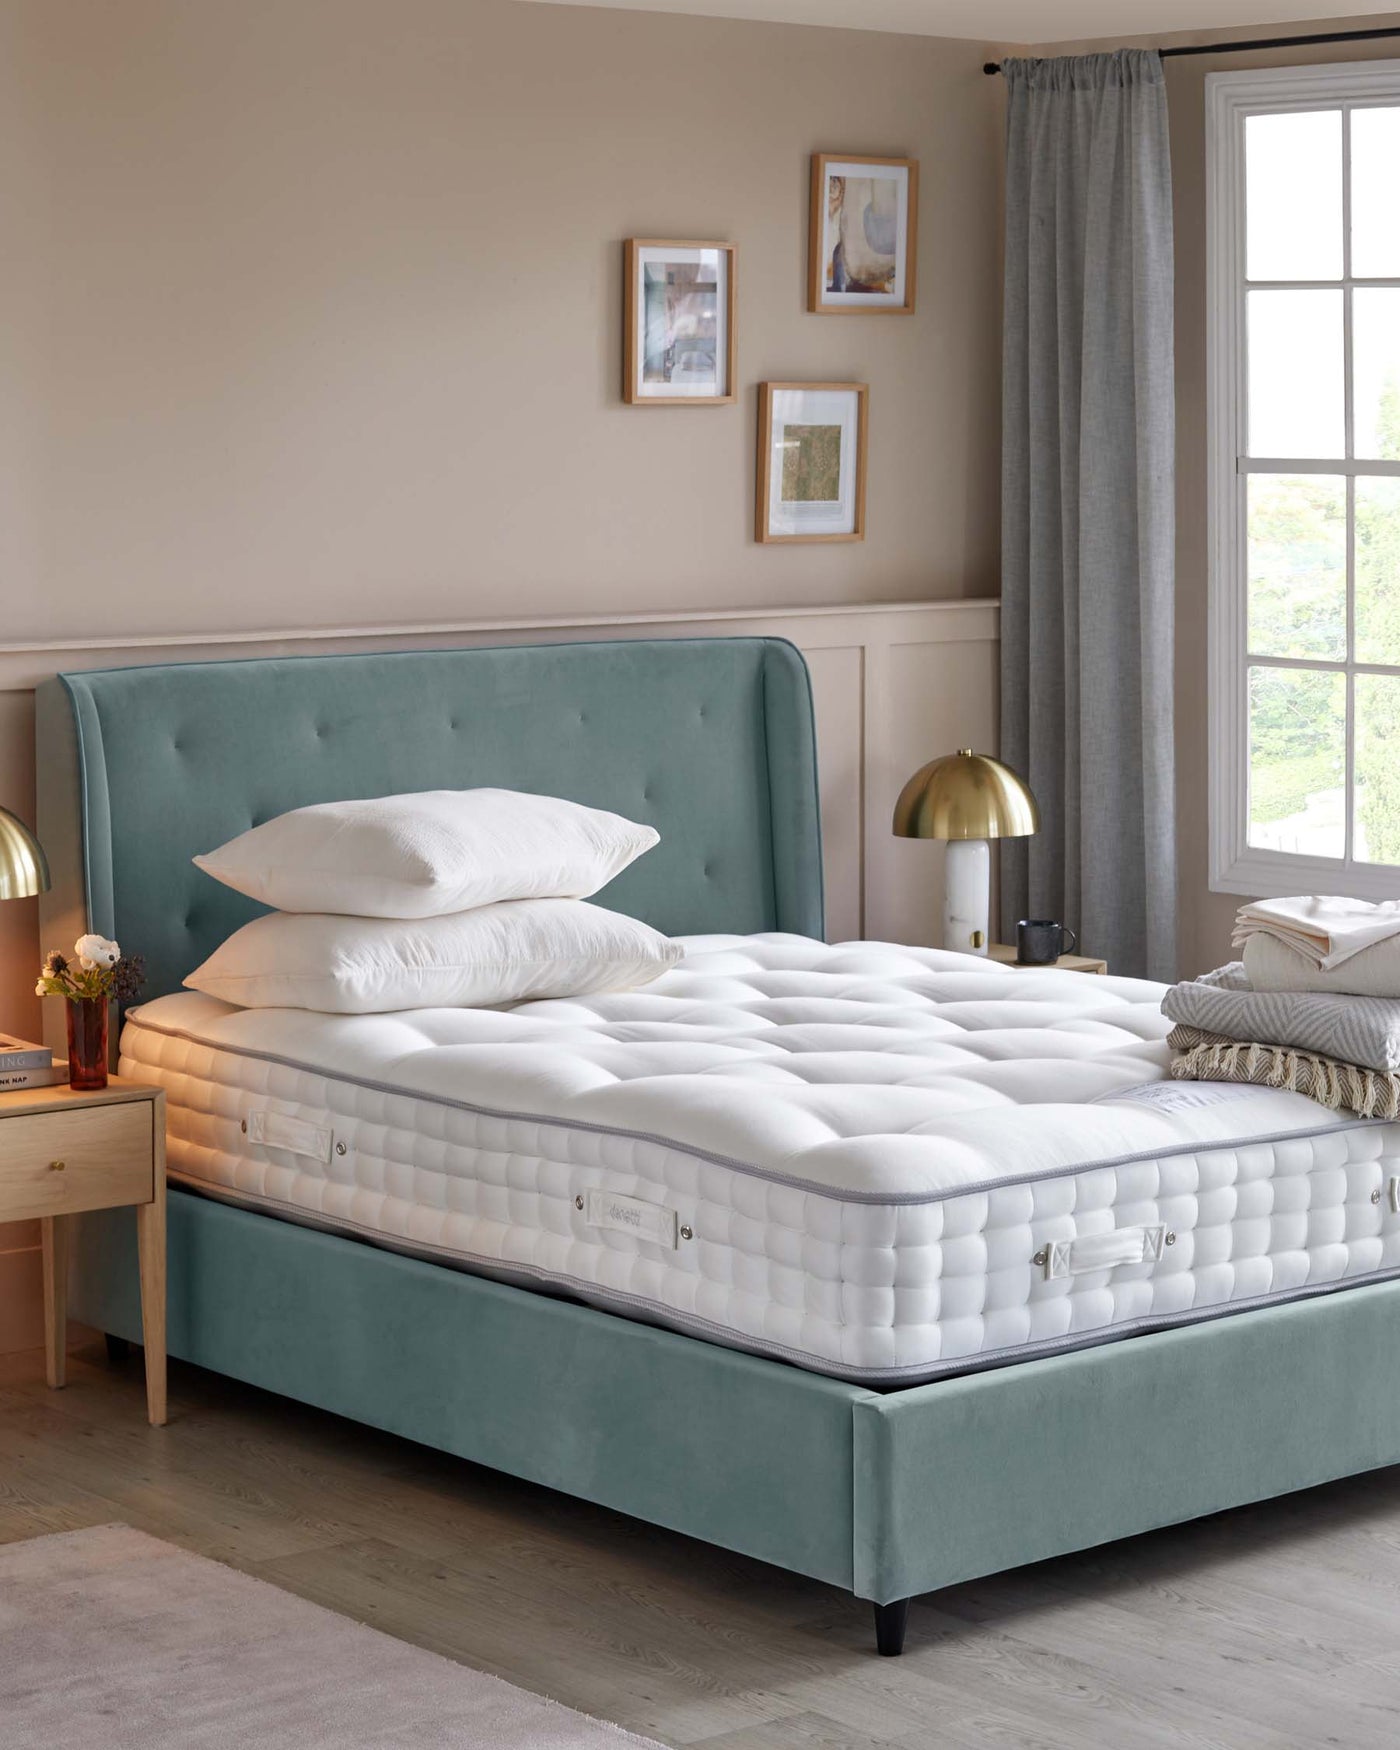 Luxury upholstered king-size bed with a tufted, plush teal headboard and a thick, plush-topped white mattress. A wooden bedside table with a natural finish stands to the left of the bed, featuring a small drawer and an open shelf.